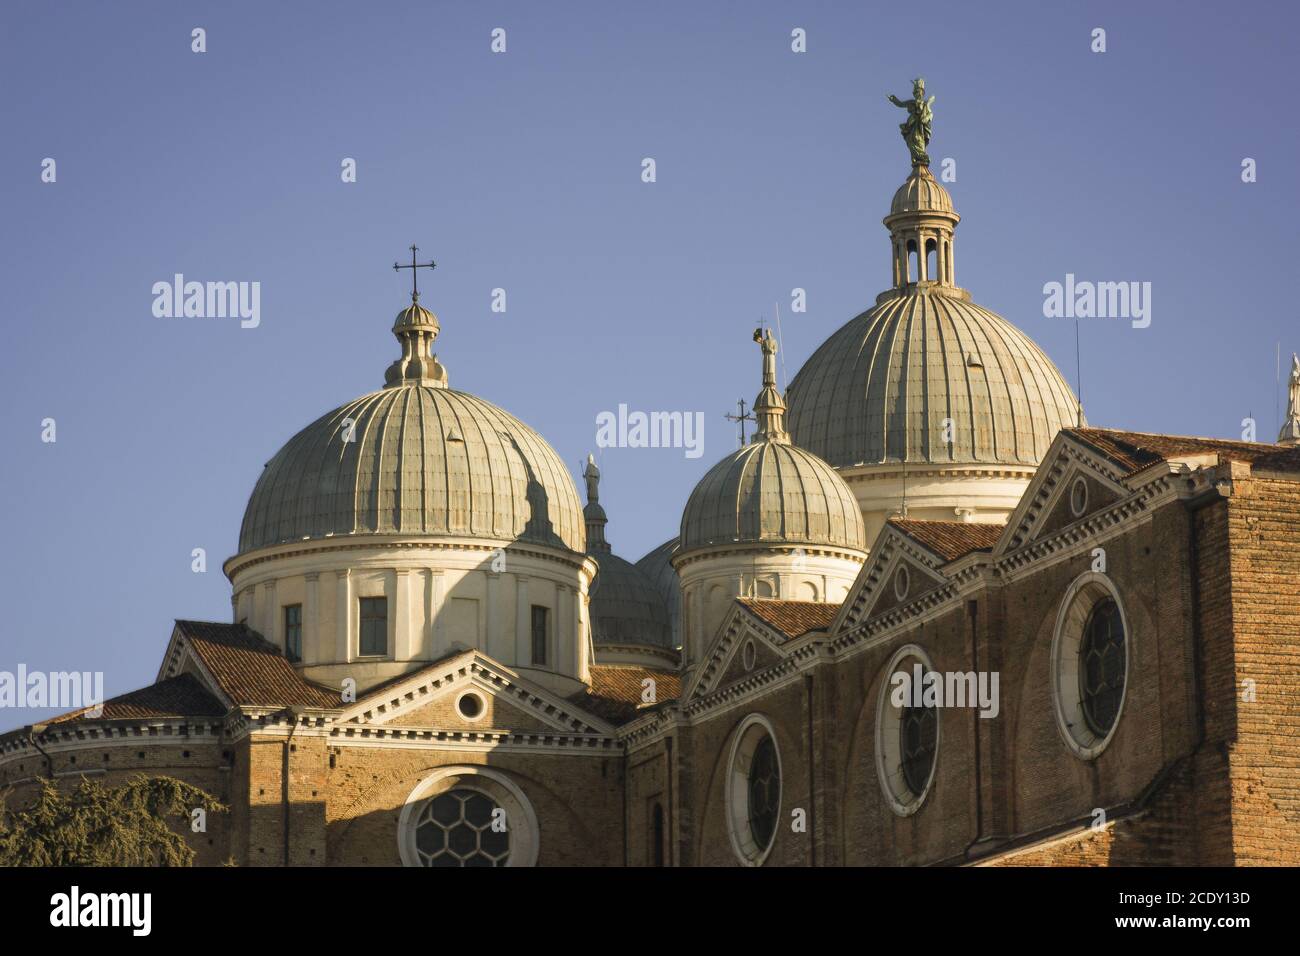 Domes in the sky Stock Photo